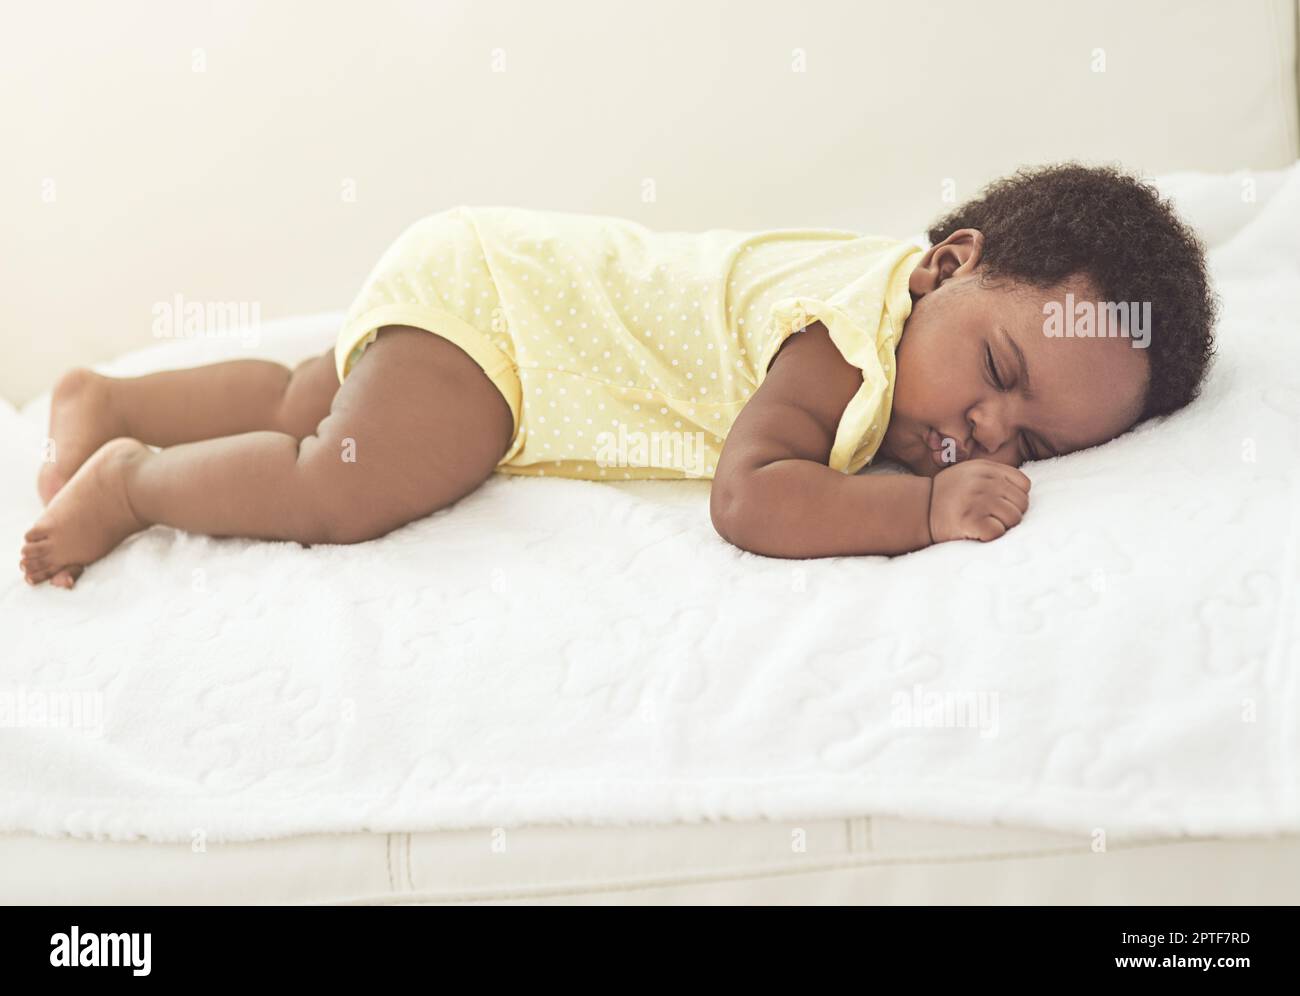 Babies need lots of rest. a baby girl asleep on a bed at home Stock Photo